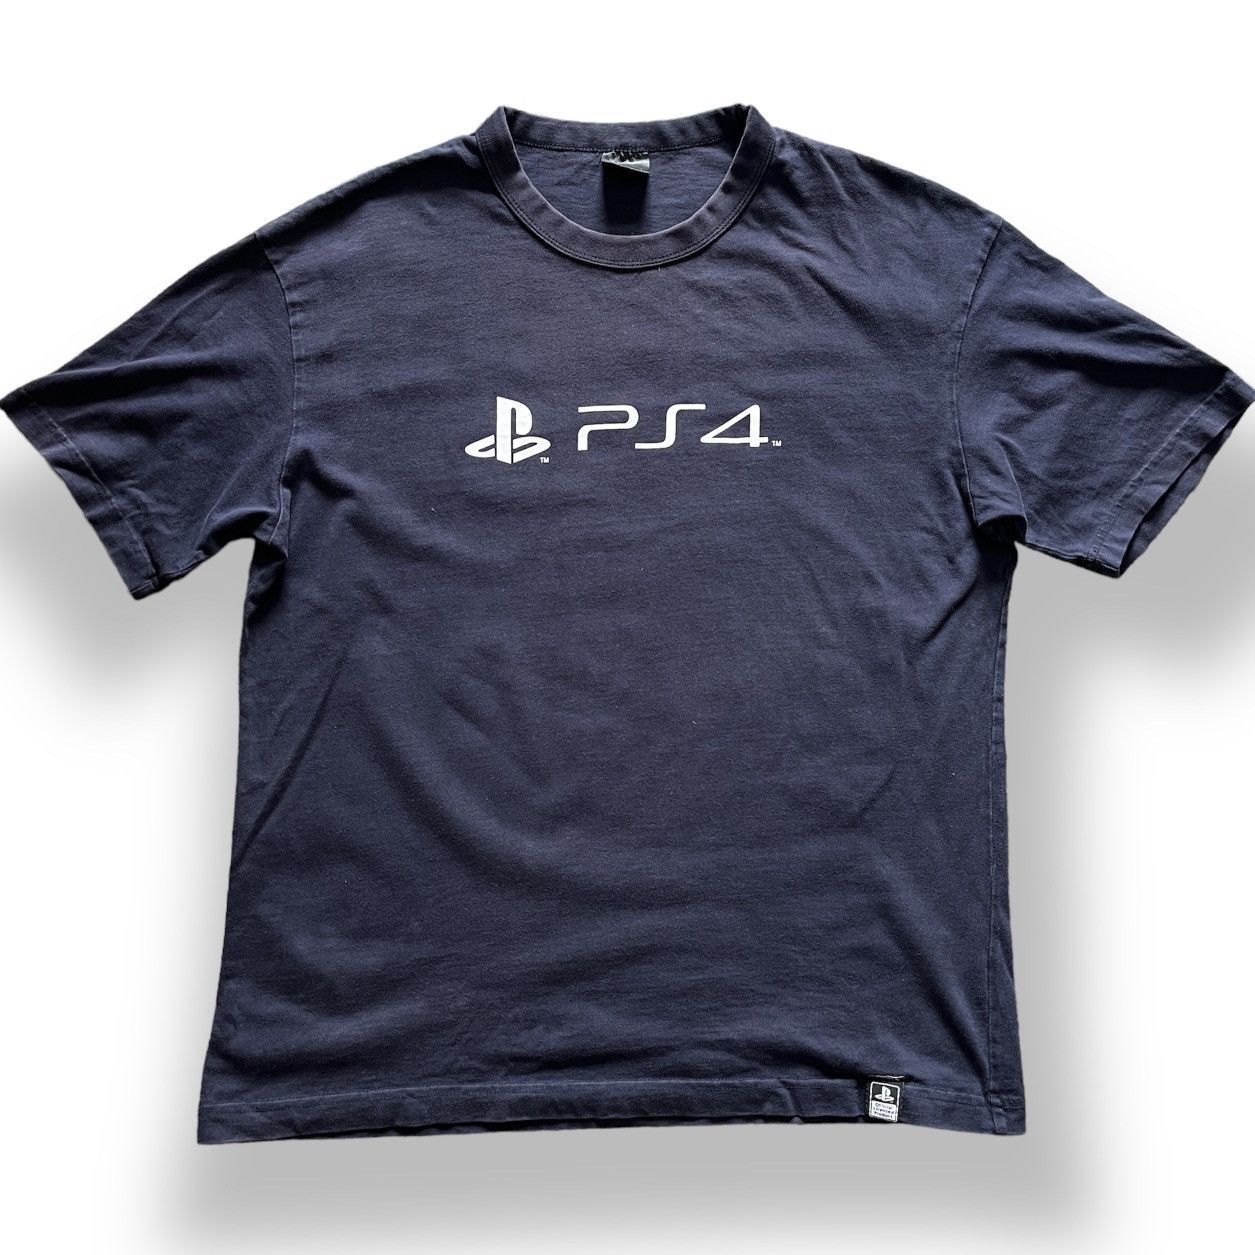 Playstation PS4 Promo TShirt Japan Official Licensed Product - 3